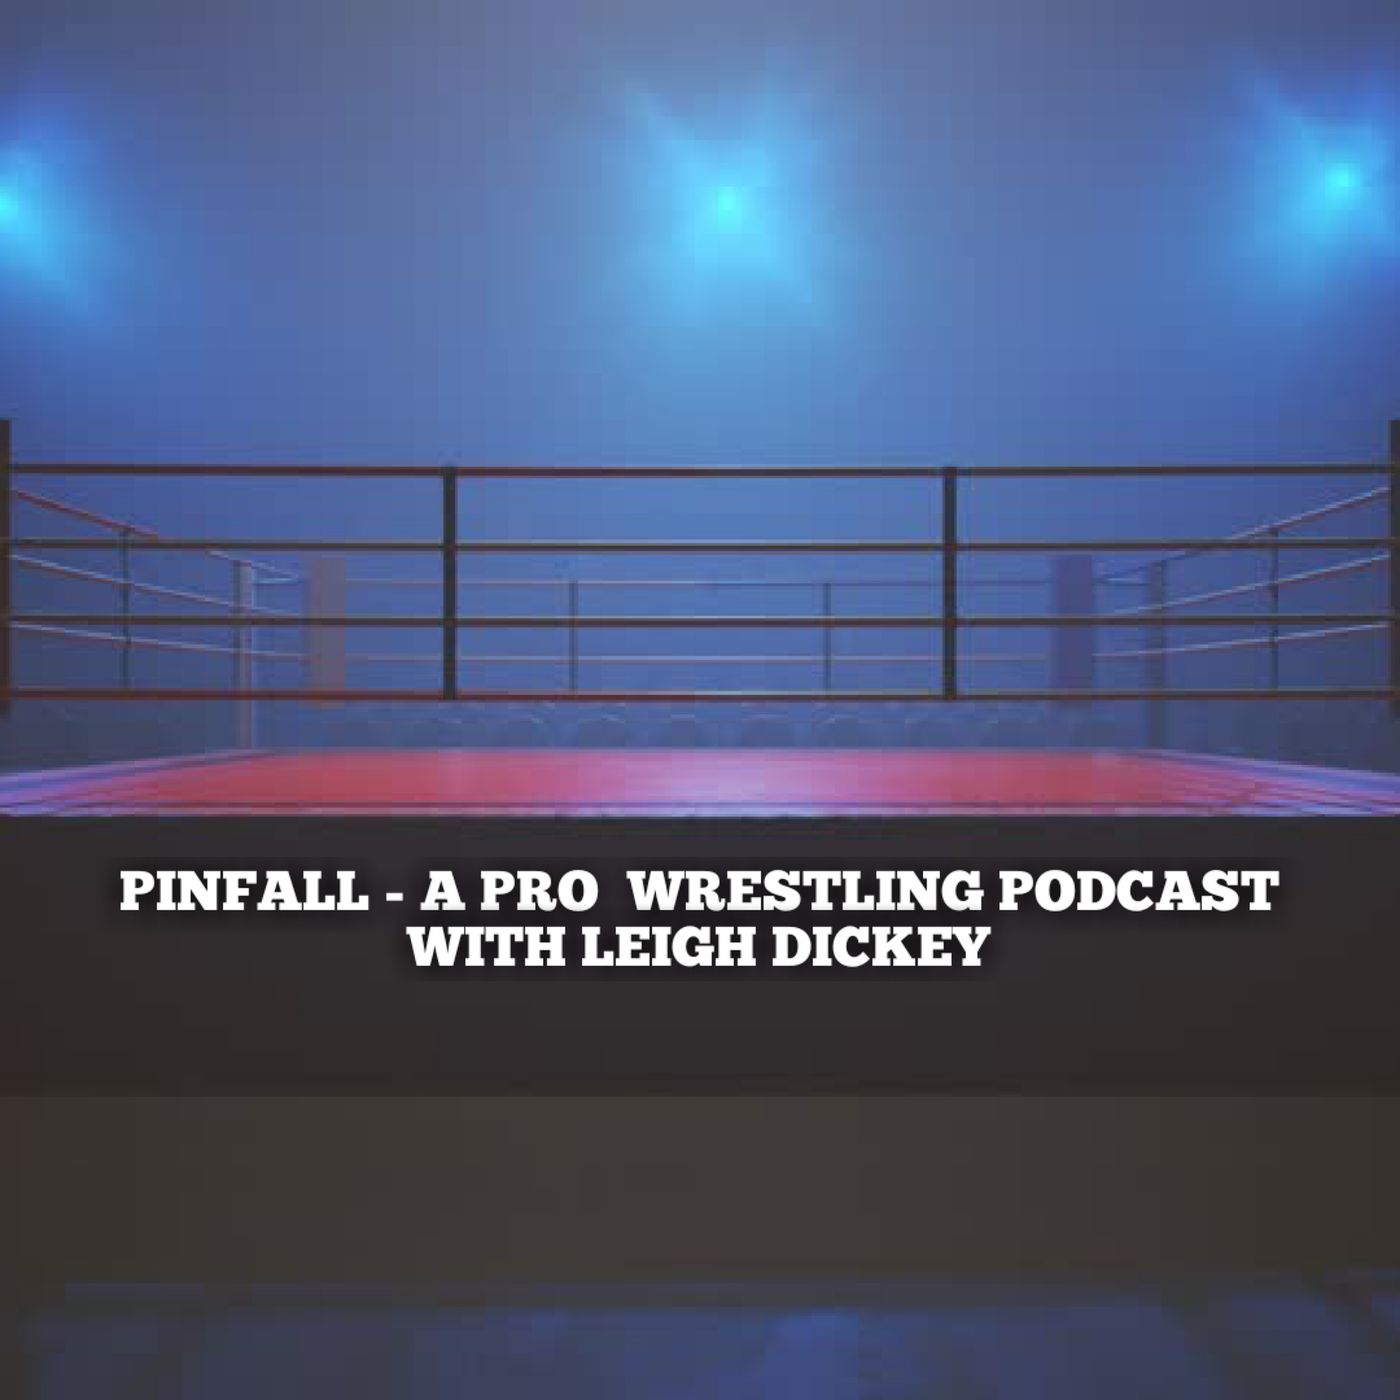 Pinfall - A Pro Wrestling Podcast